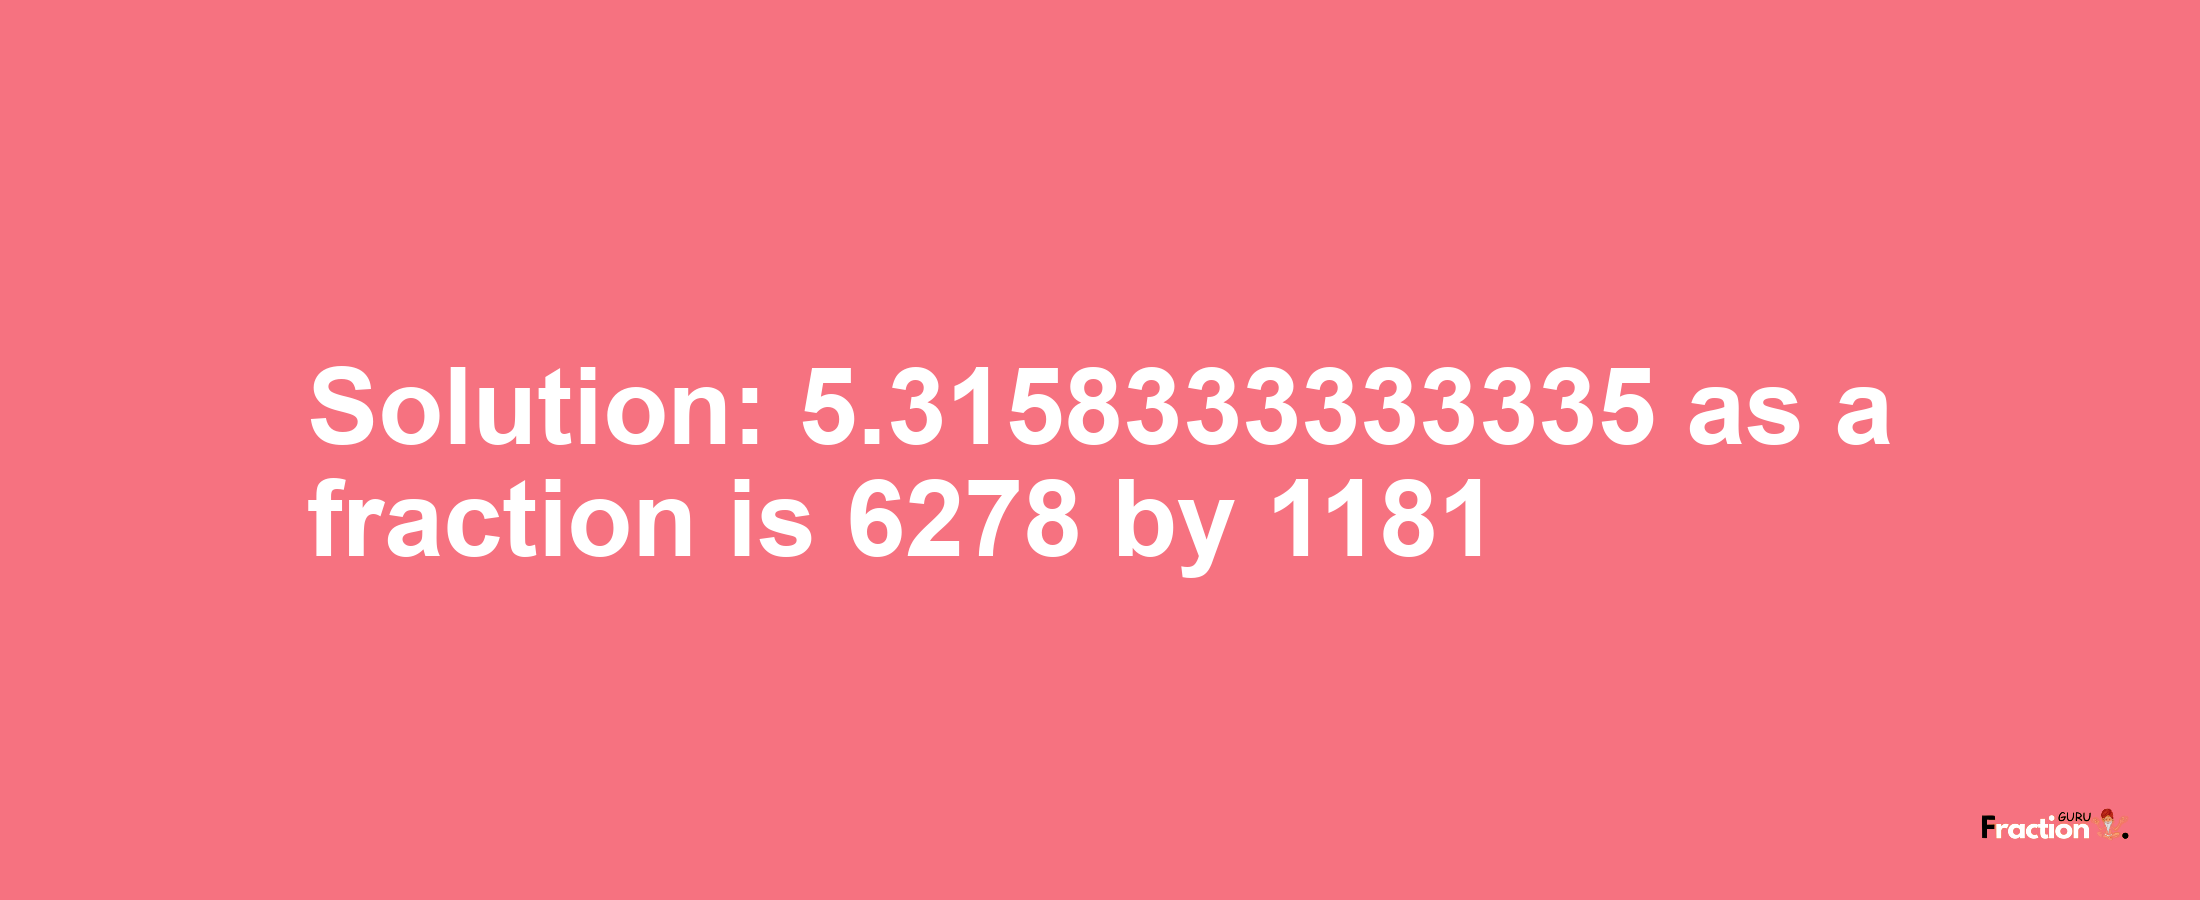 Solution:5.3158333333335 as a fraction is 6278/1181